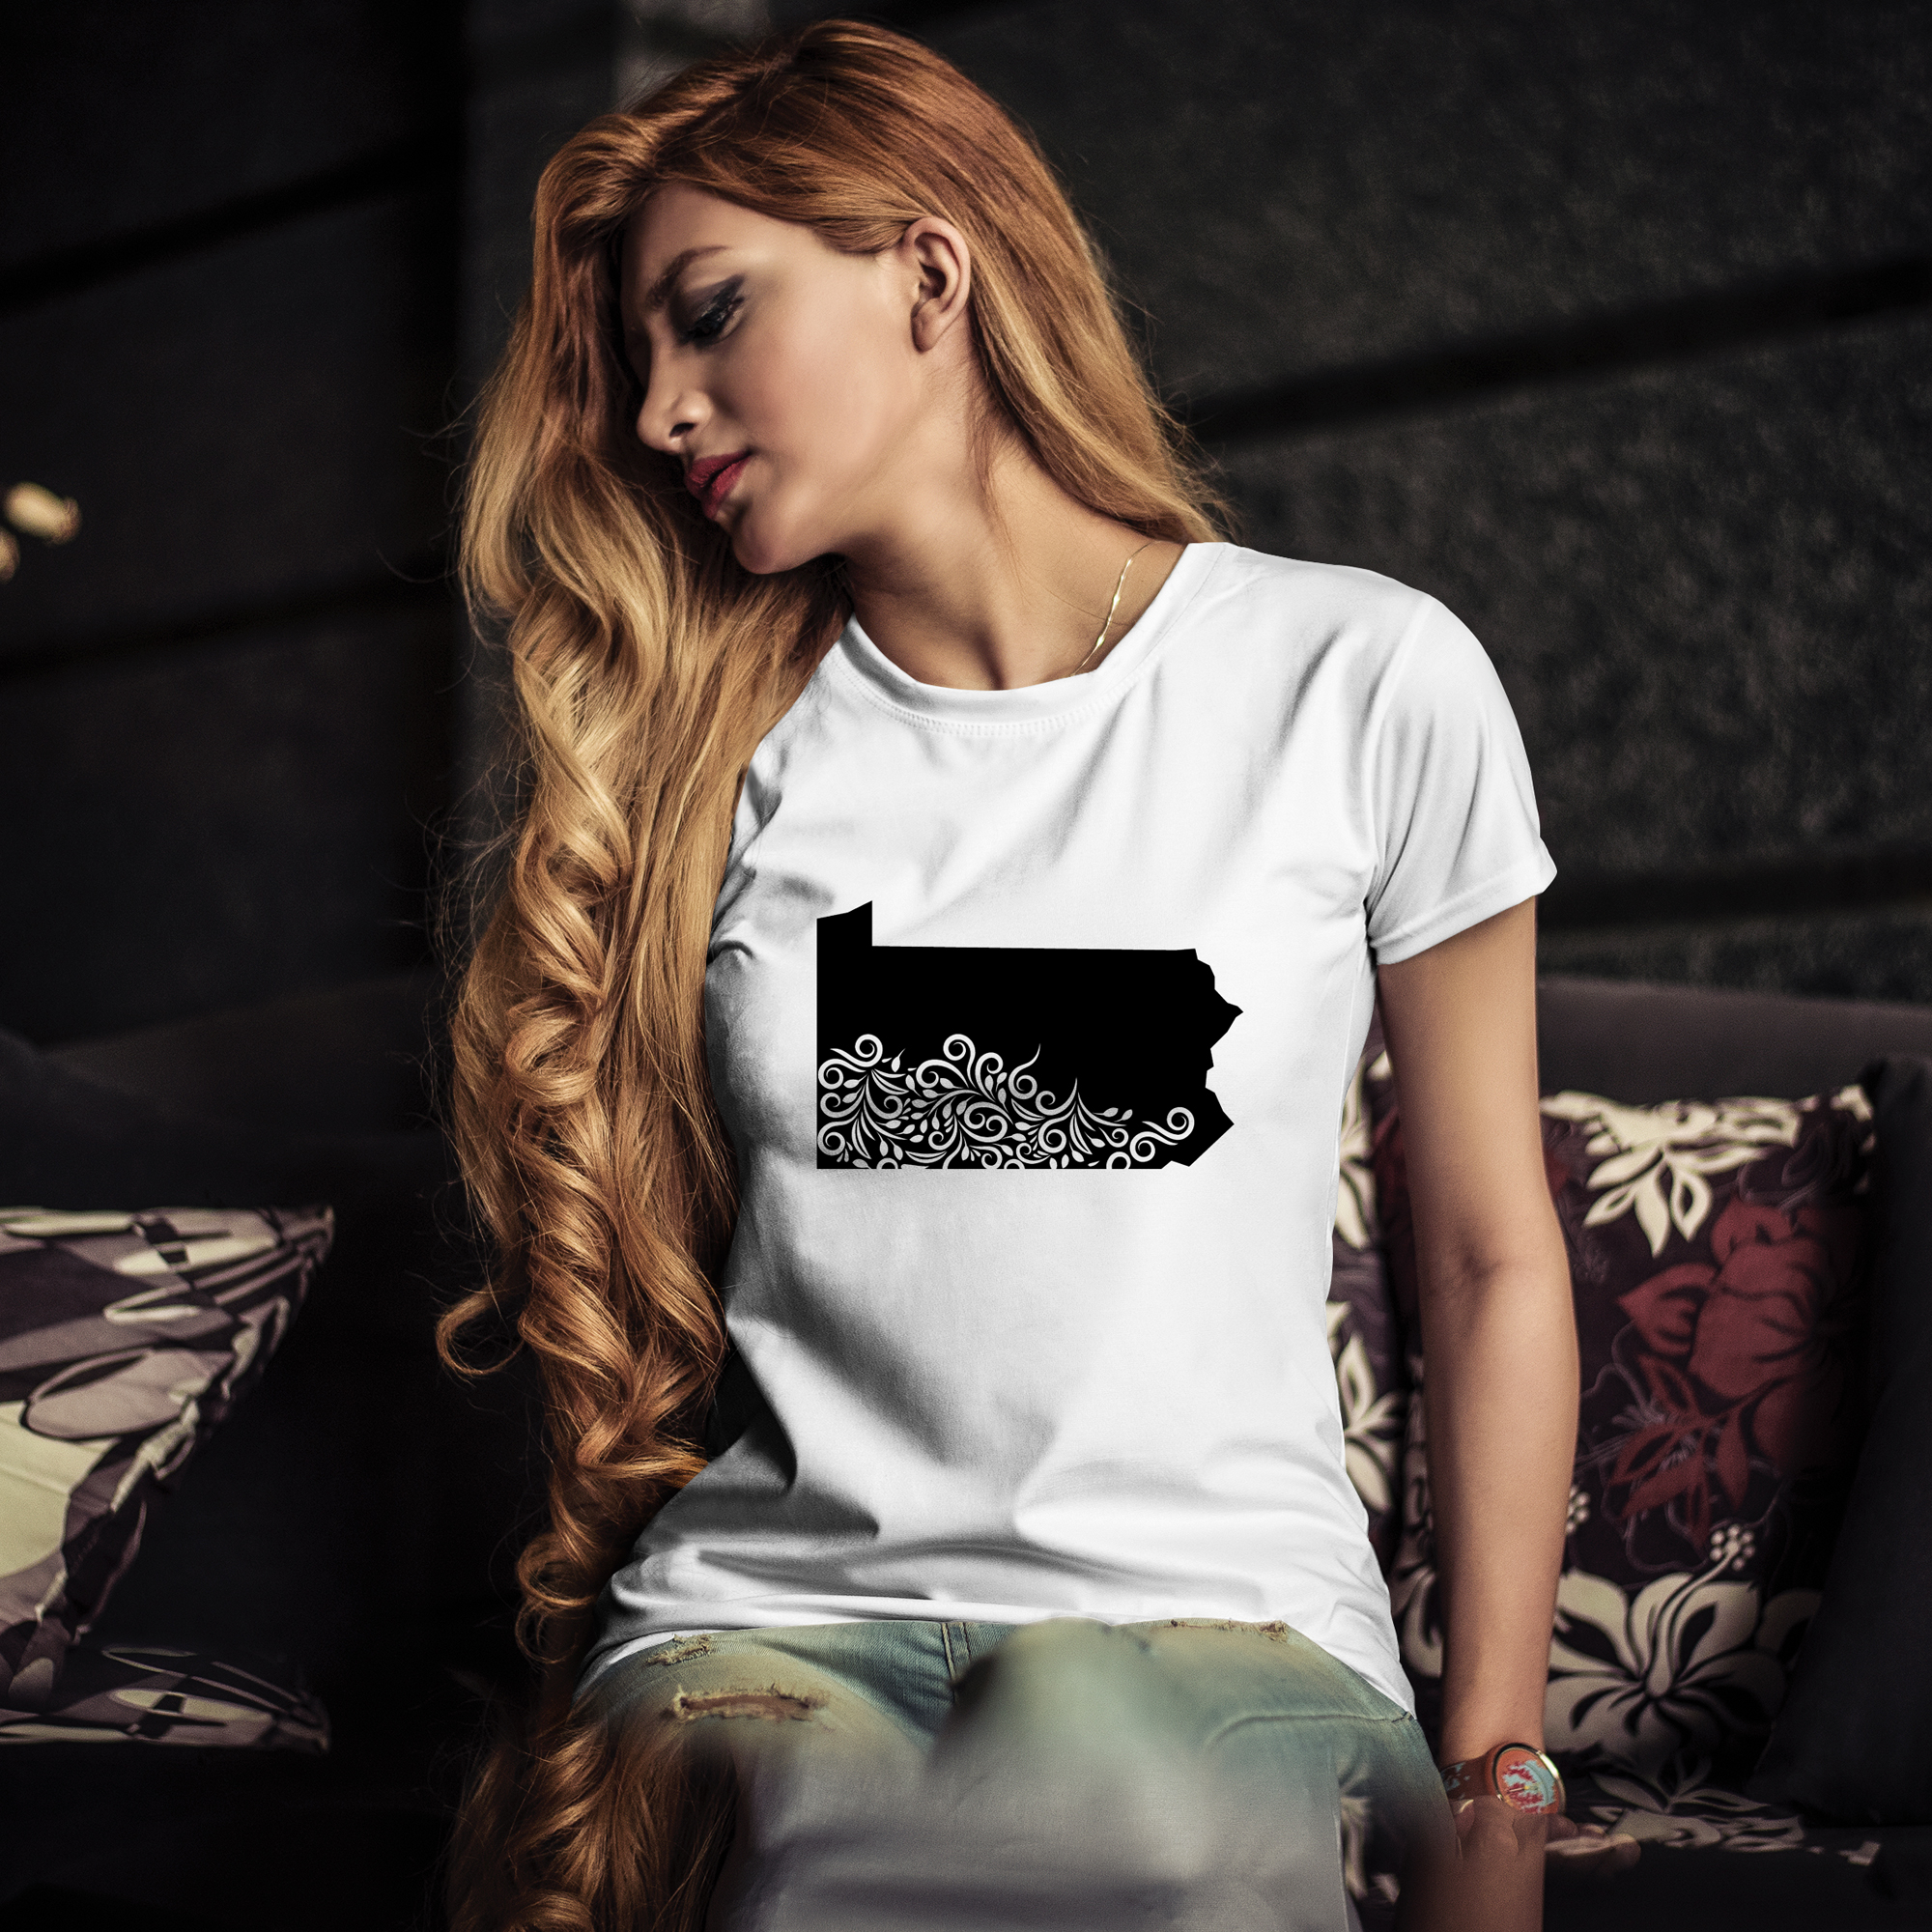 White t-shirt with black illustration of Pennsylvania state.